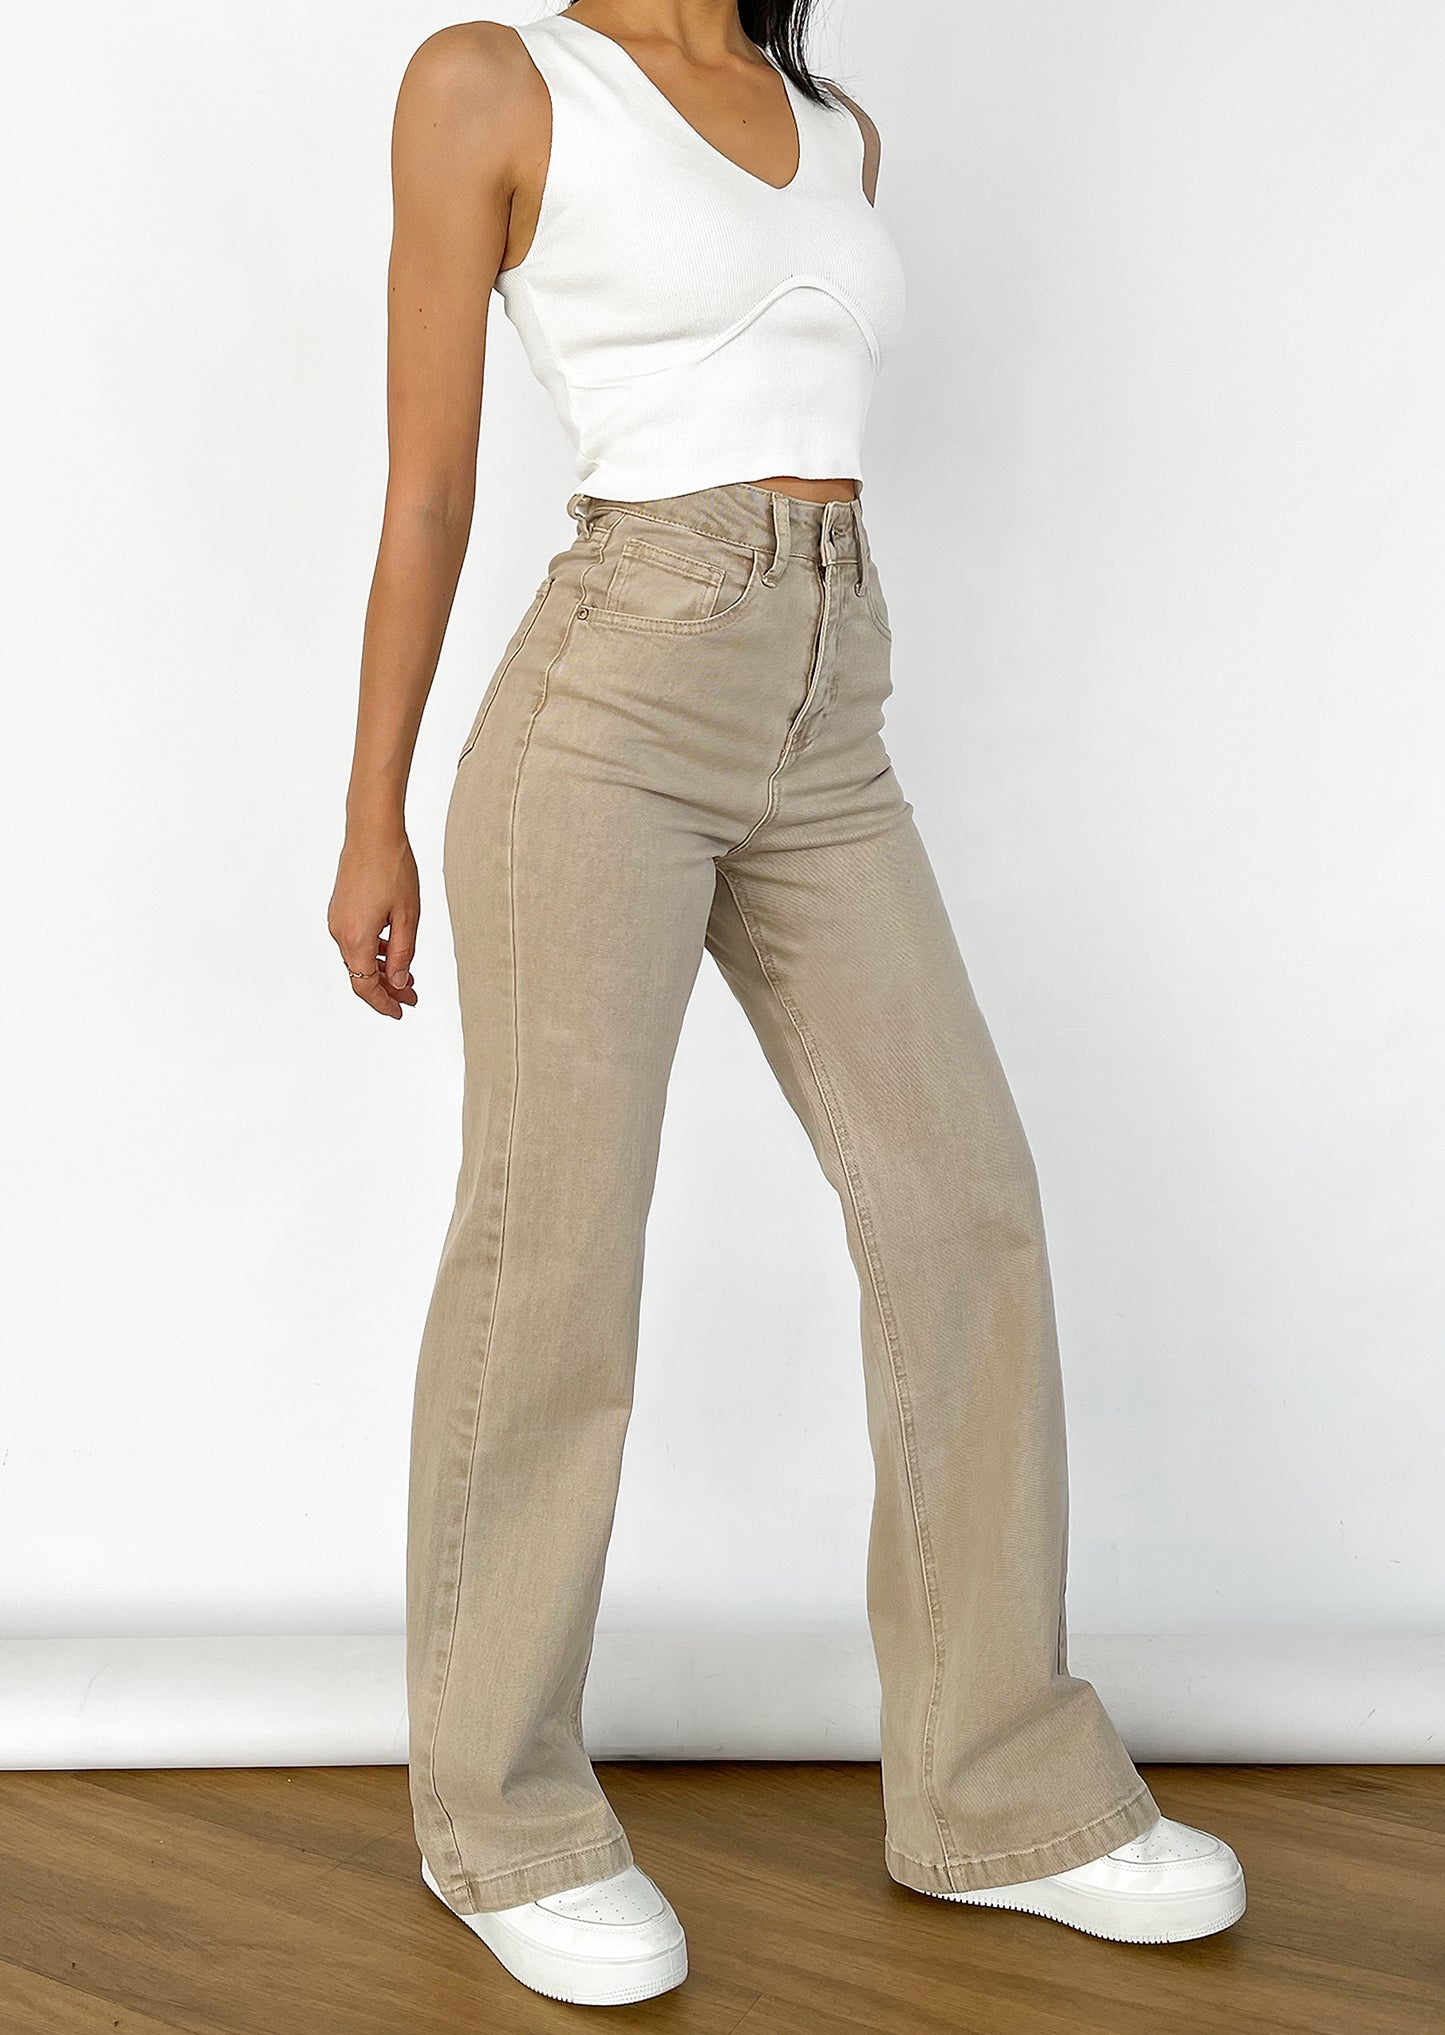 Flare jeans in beige